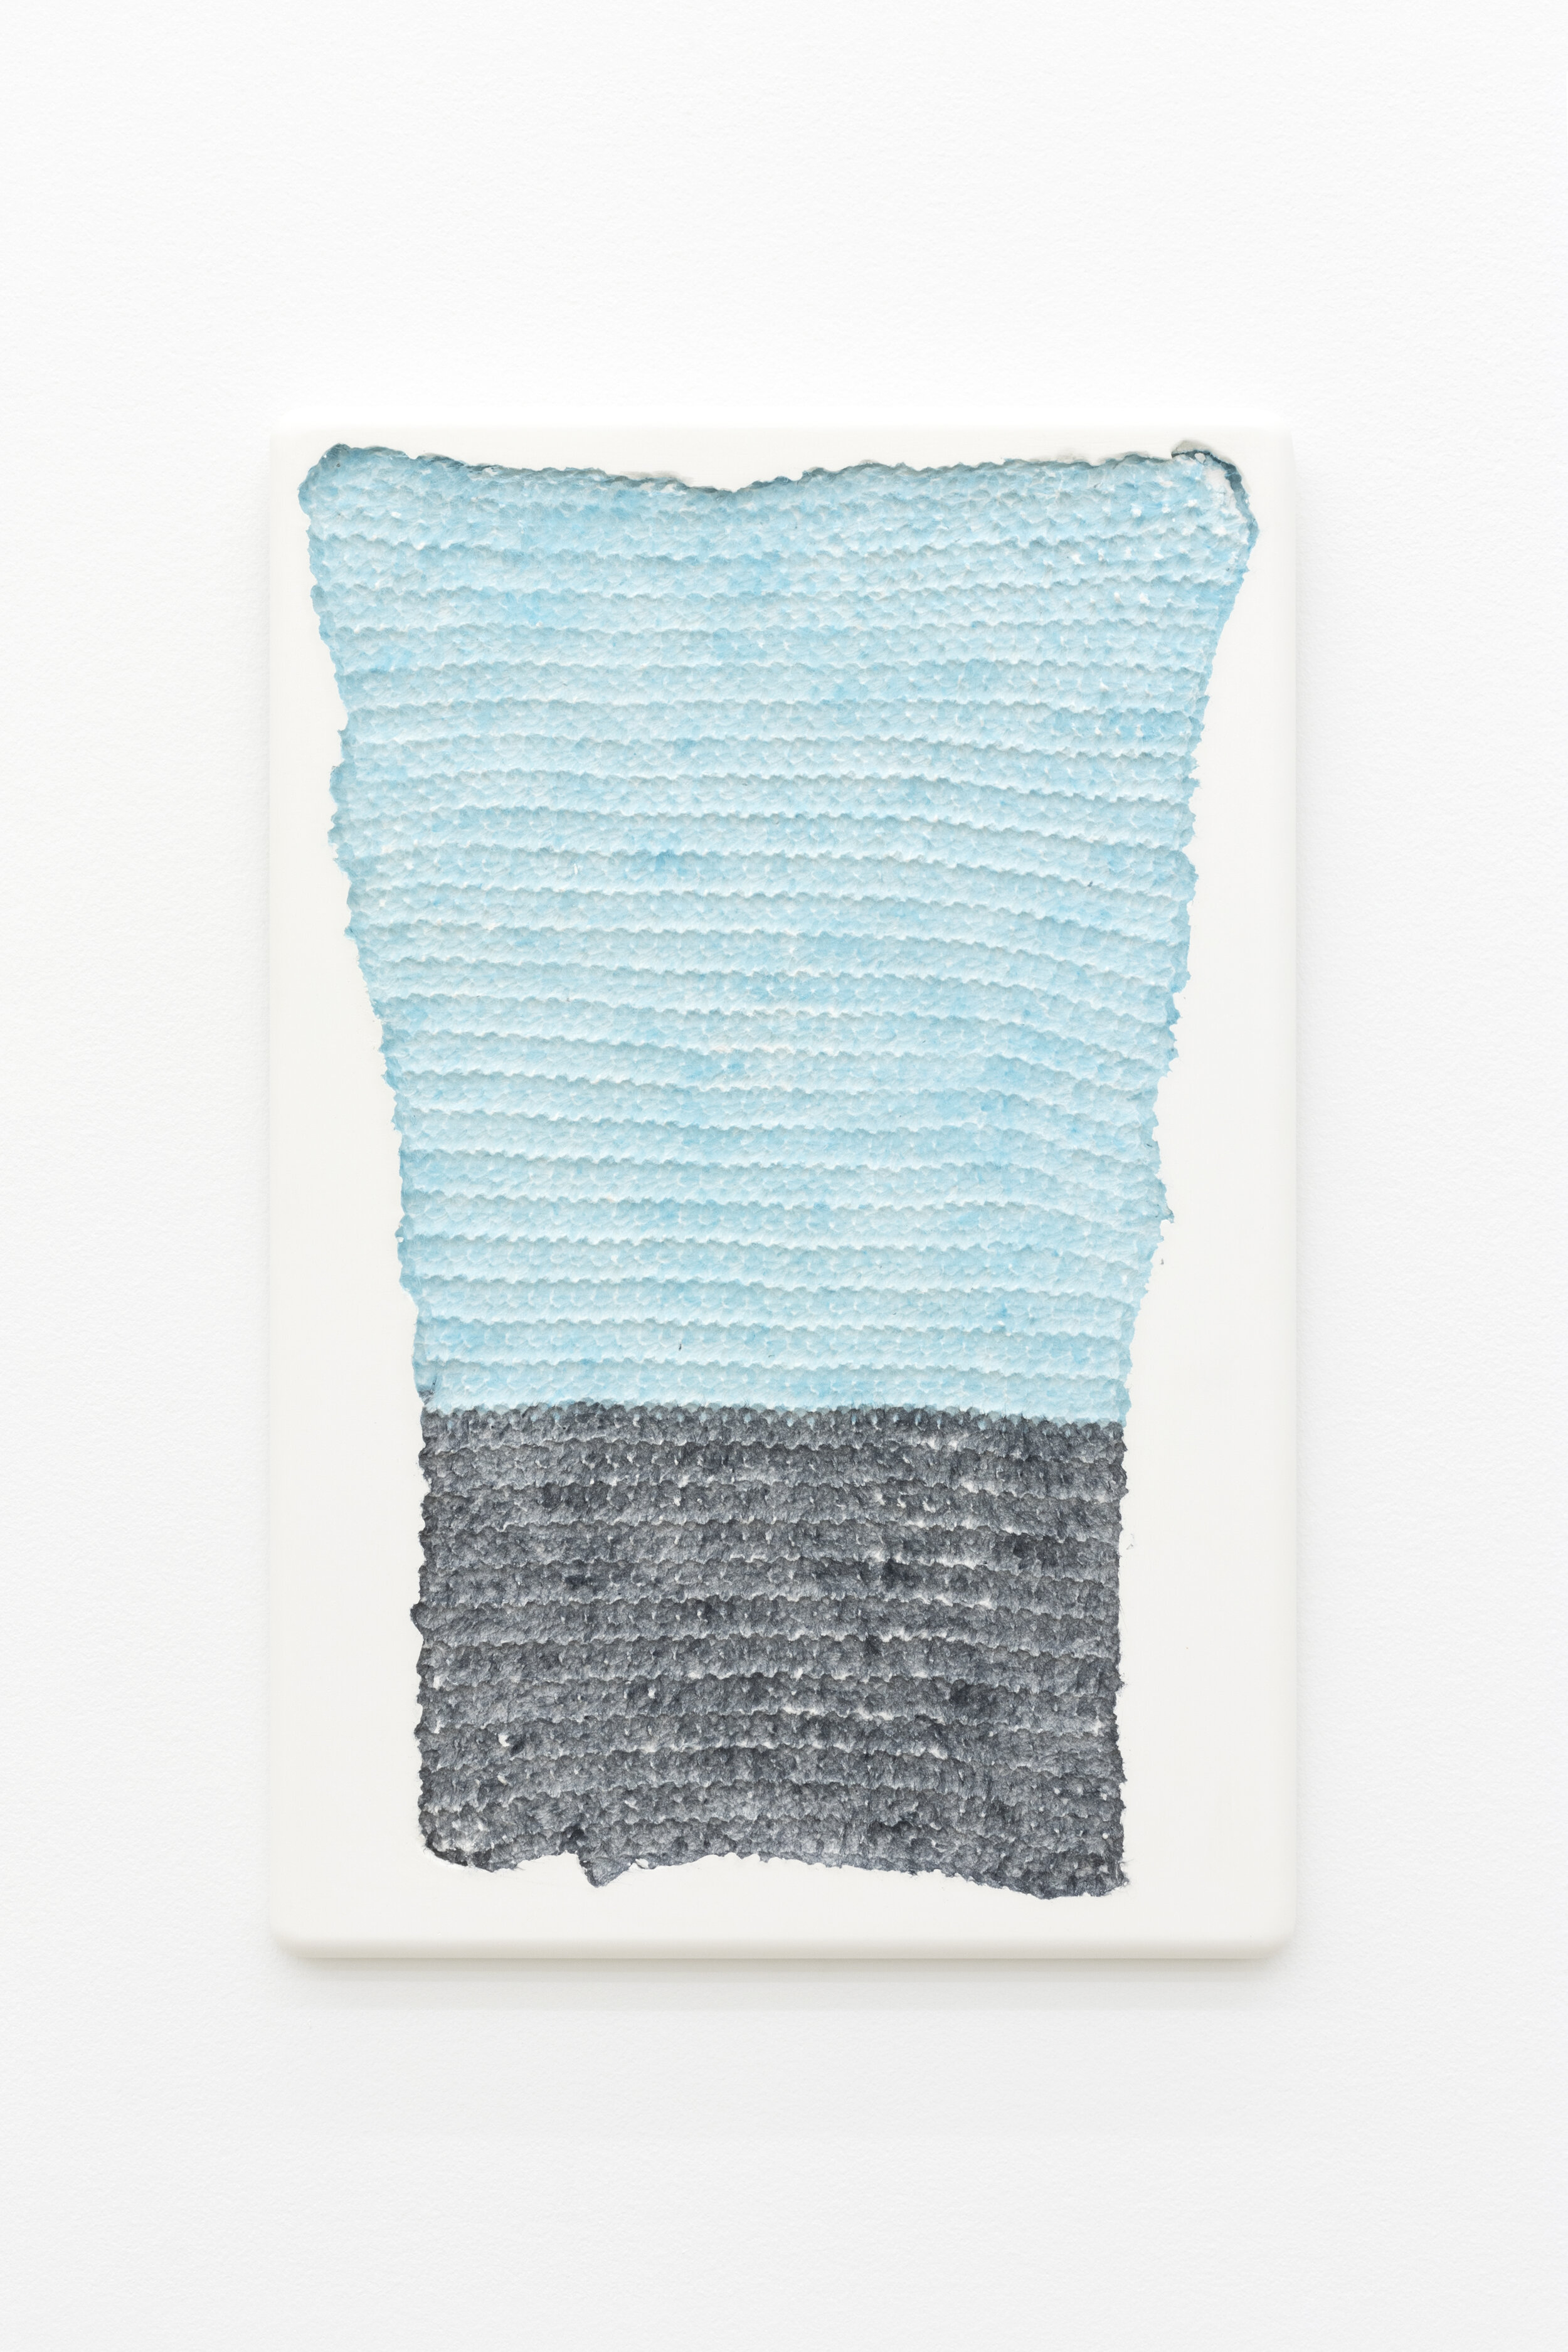  Michelle Grabner   Untitled , 2020  plaster cast with dyed cotton fibers  20 x 13 in. 